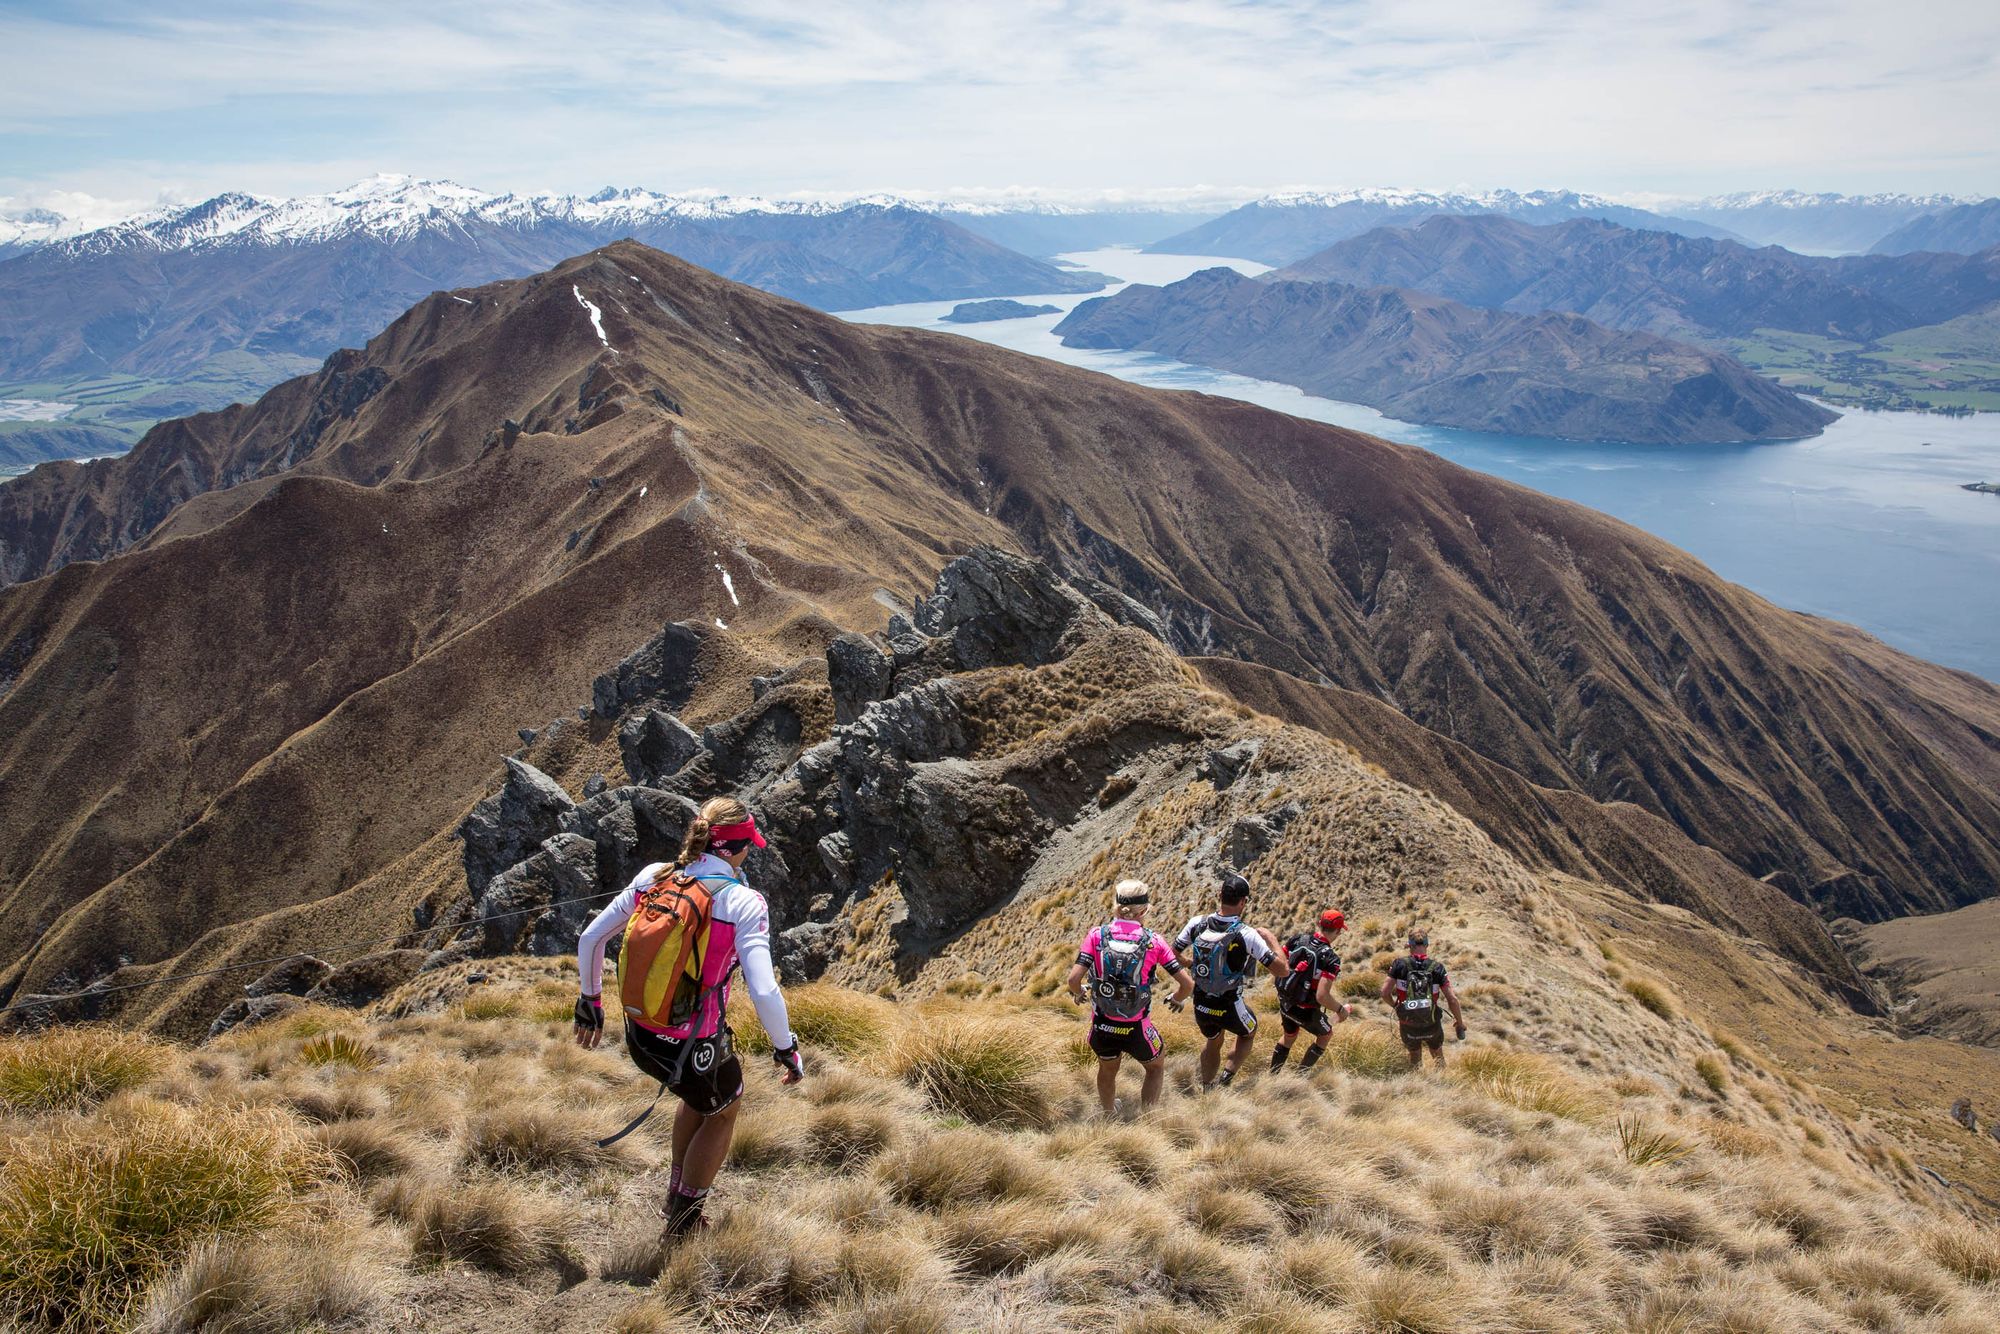 Competitors perform during the run stage during the Red Bull Defiance in Wanaka